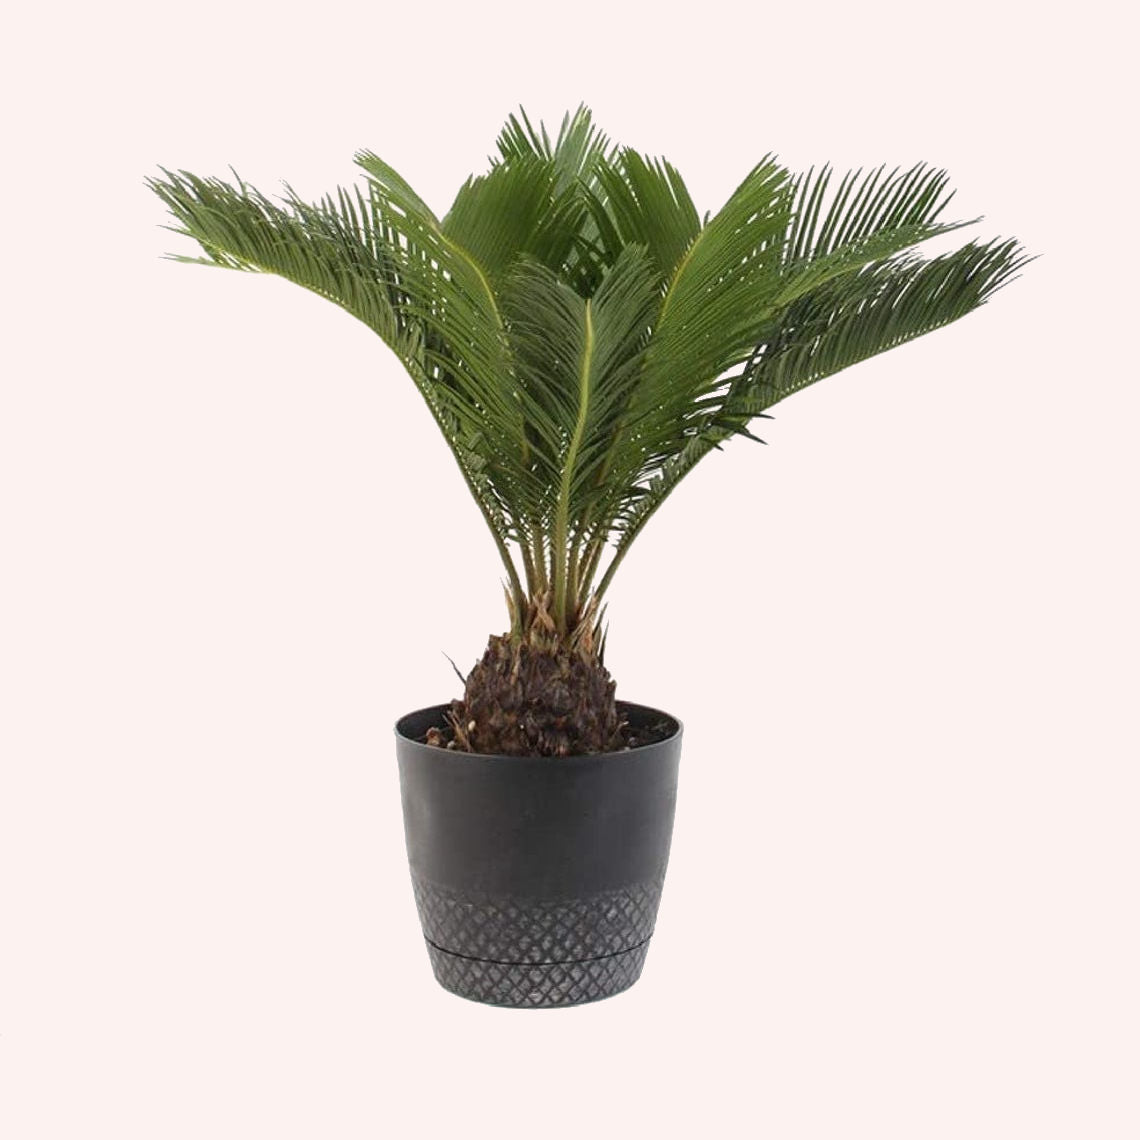 King Sago Palm Tree in a 6" pot.